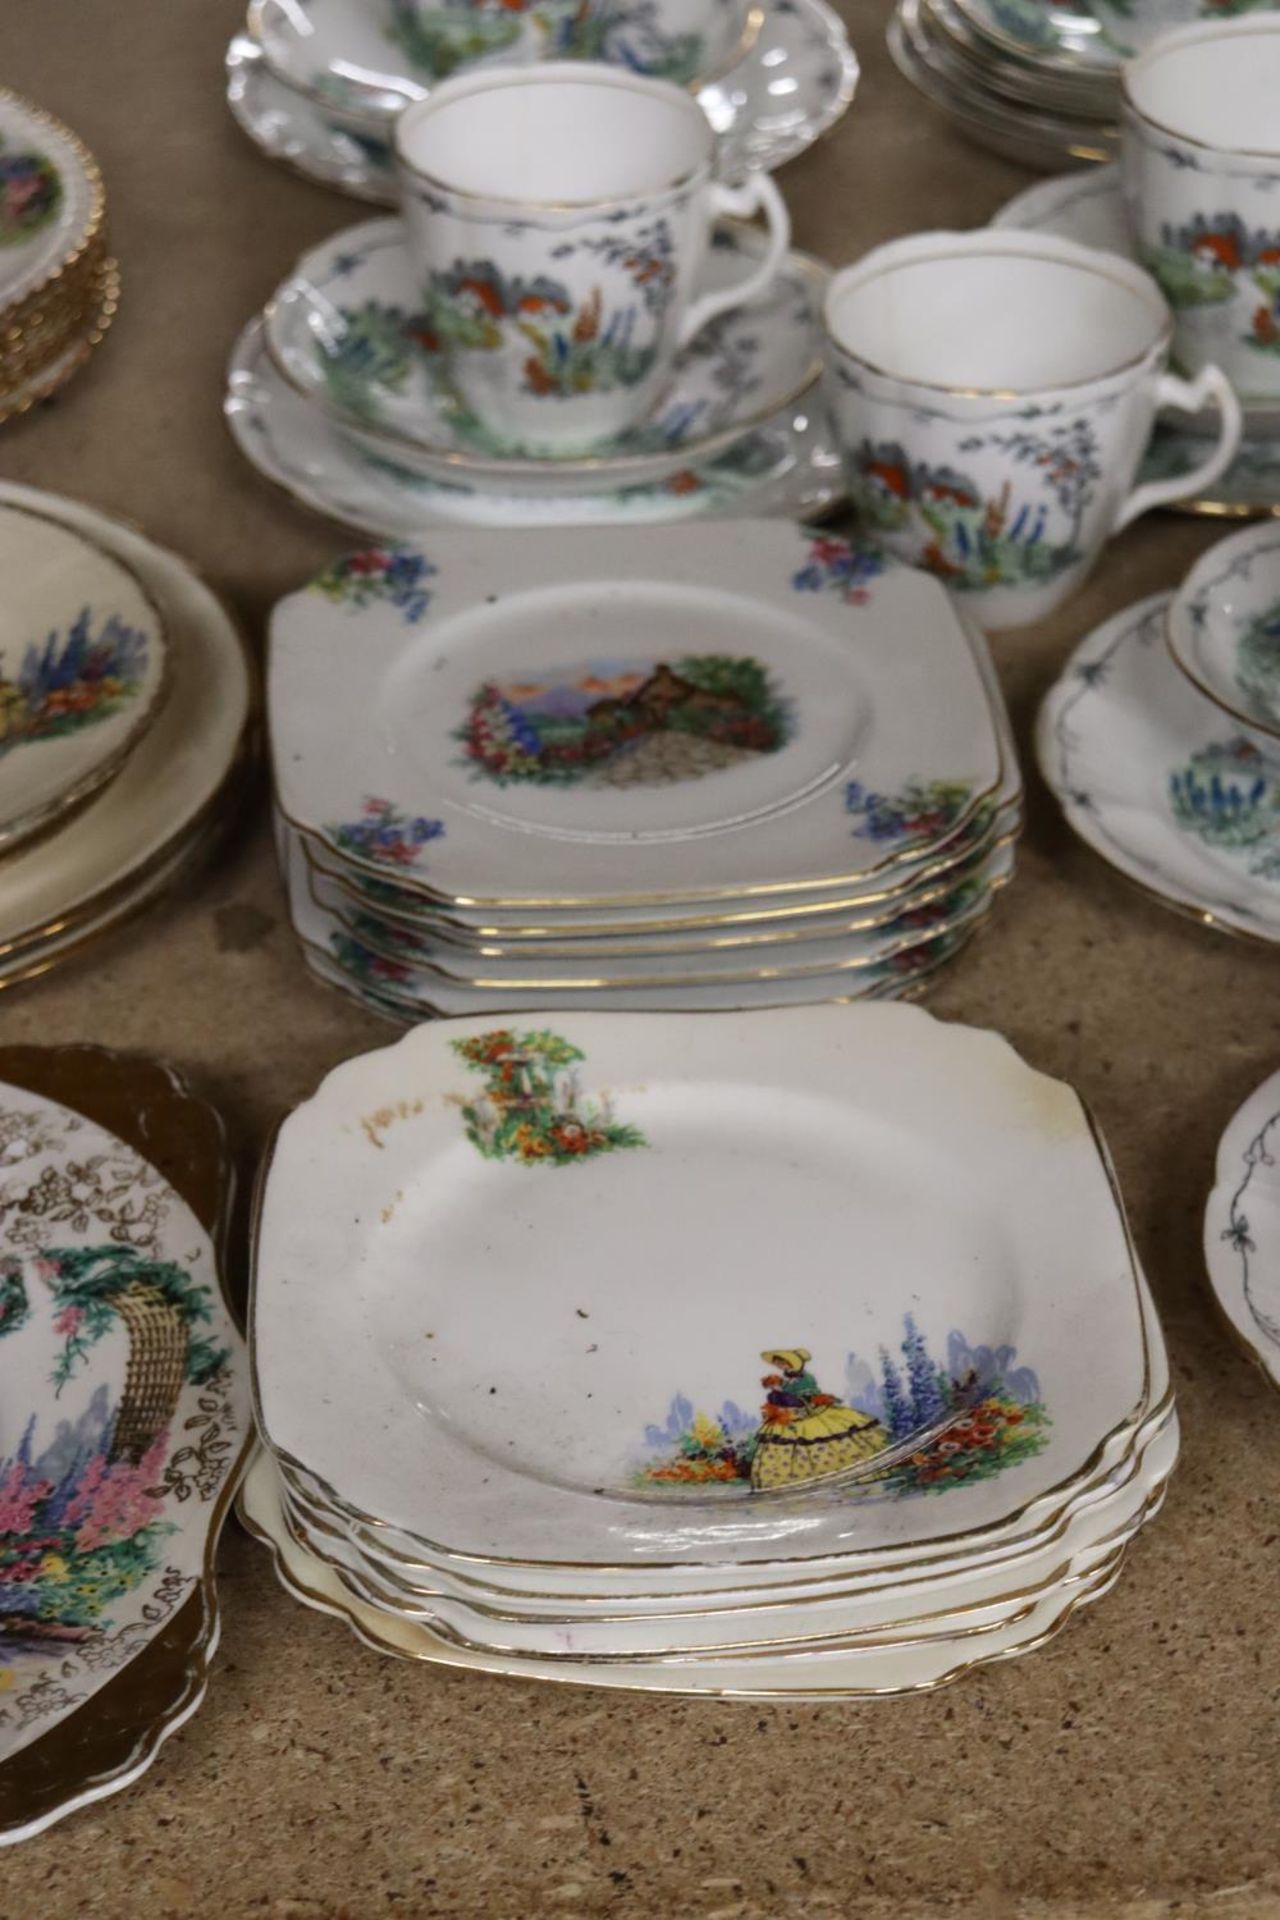 A QUANTITY OF VINTAGE CHINA CUPS, SAUCERS AND PLATES - Image 4 of 4